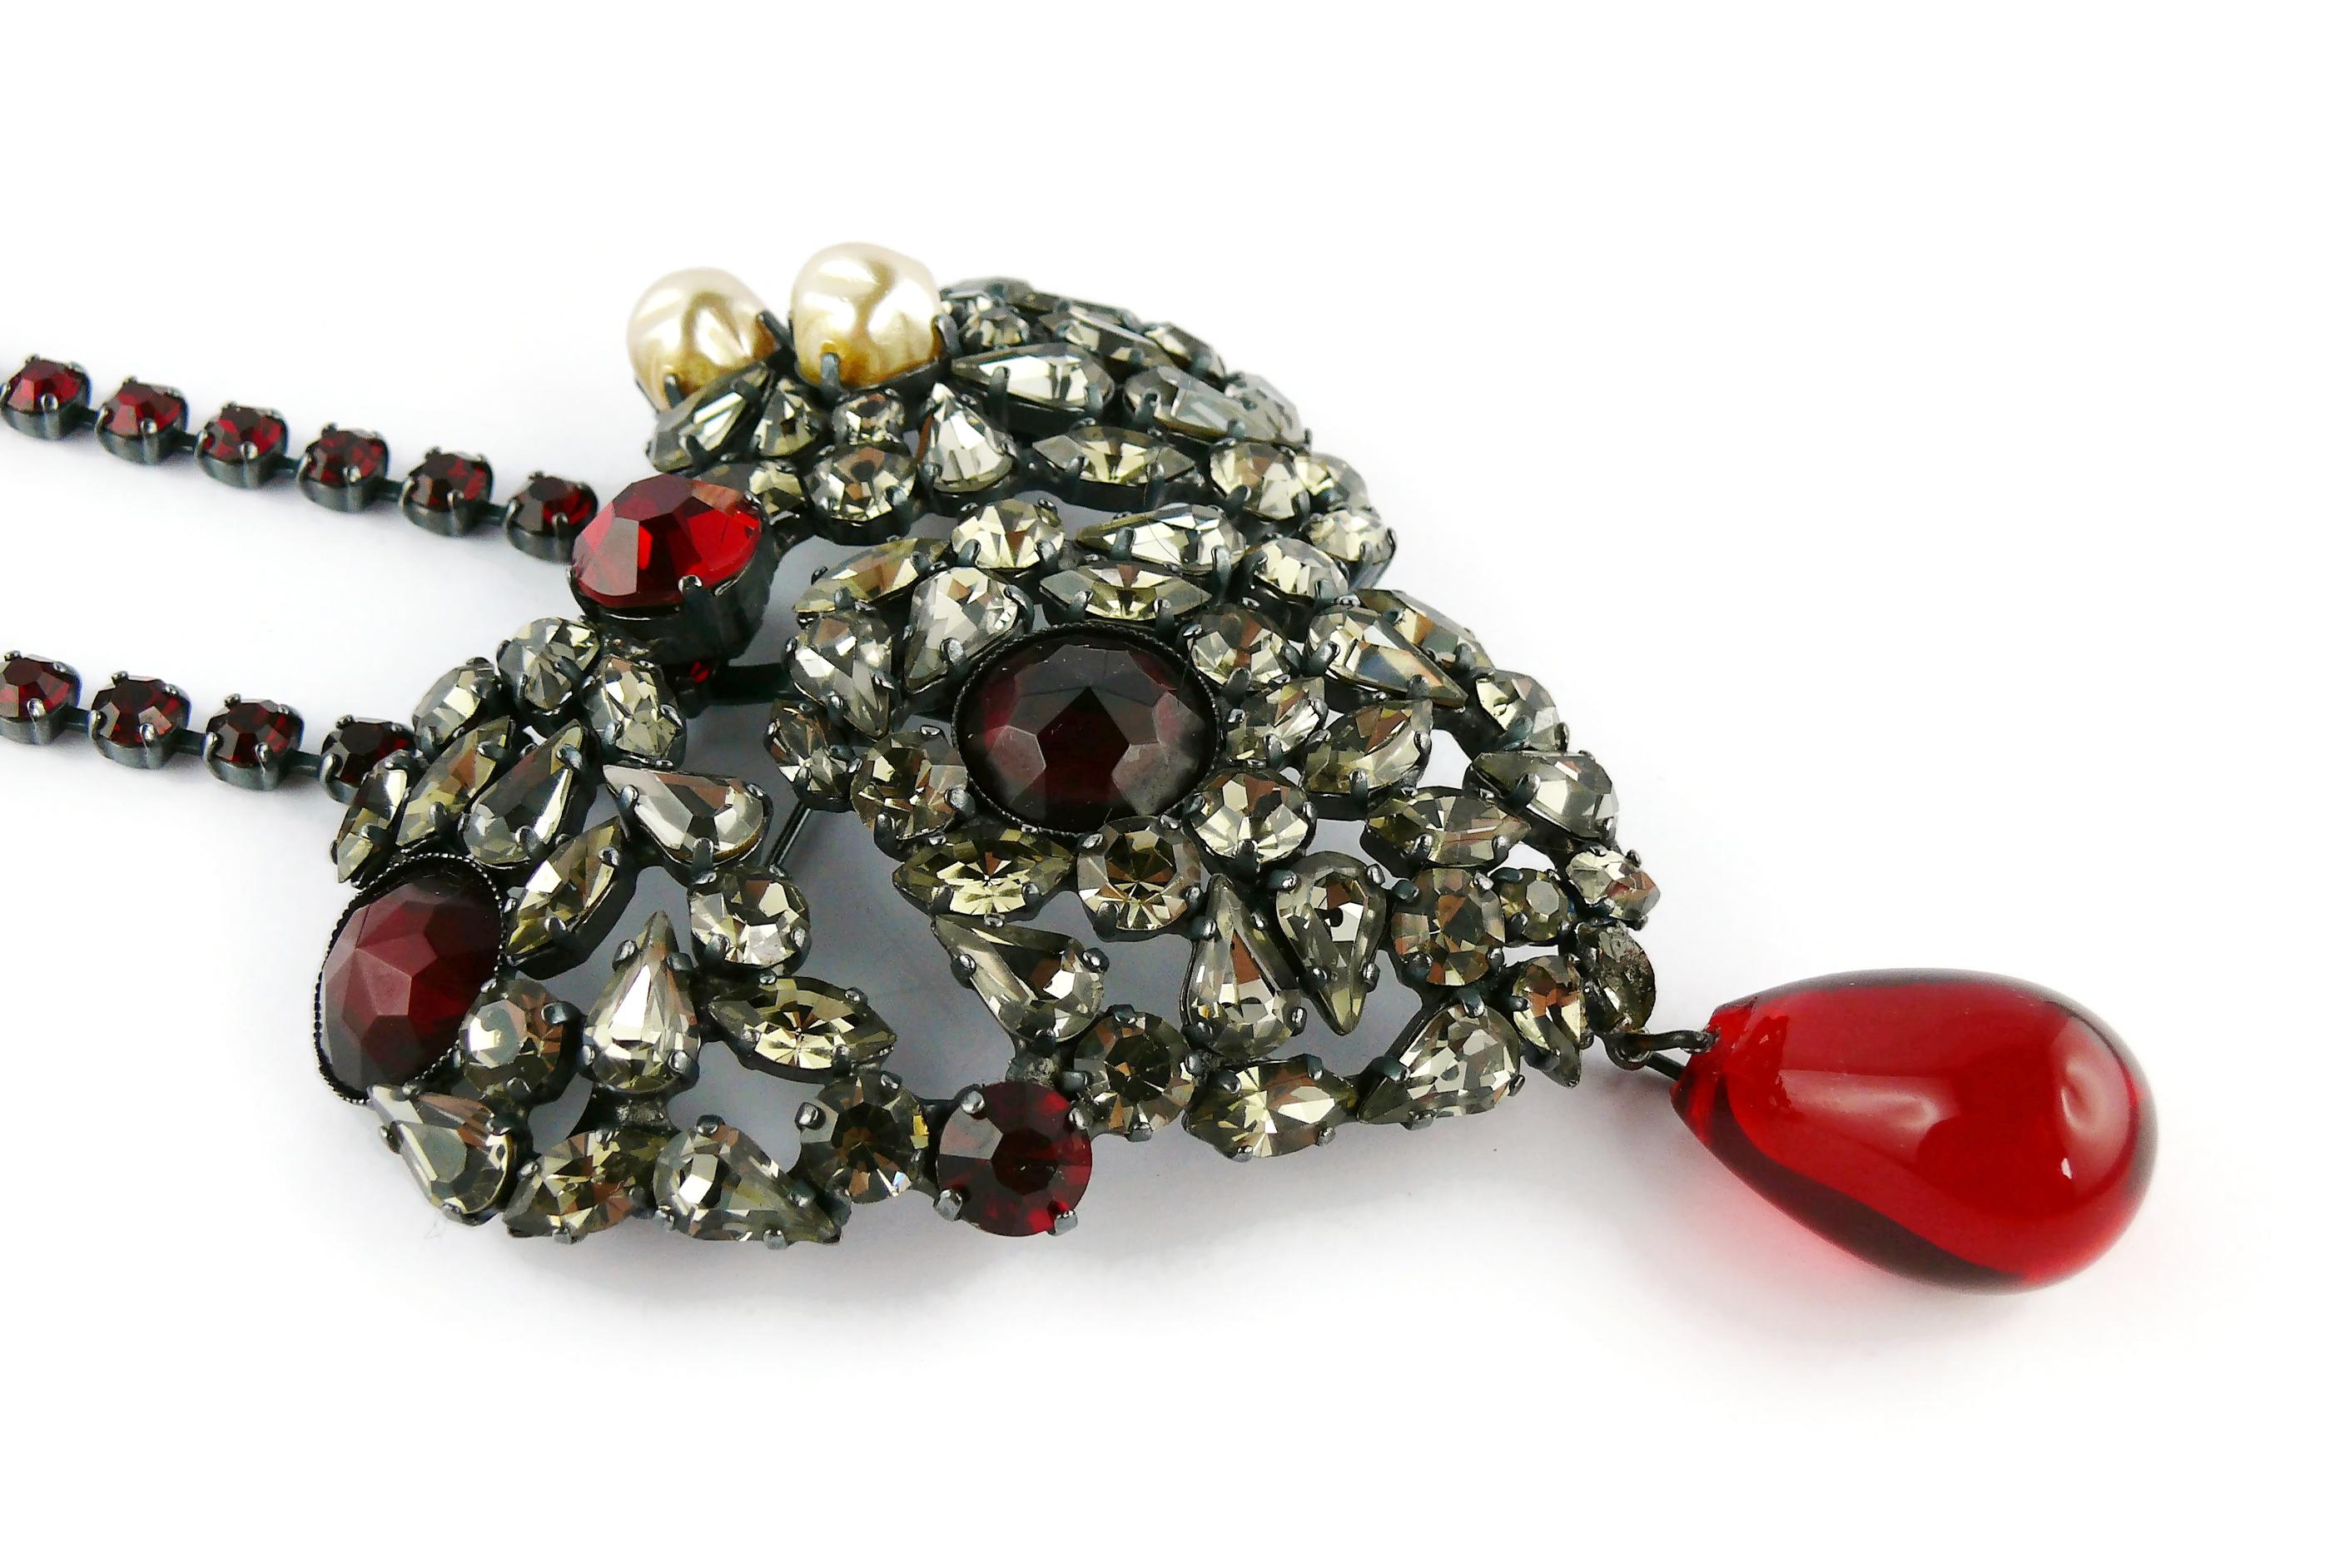 Women's Yves Saint Laurent Vintage Massive Iconic Bejeweled Heart Brooch Necklace